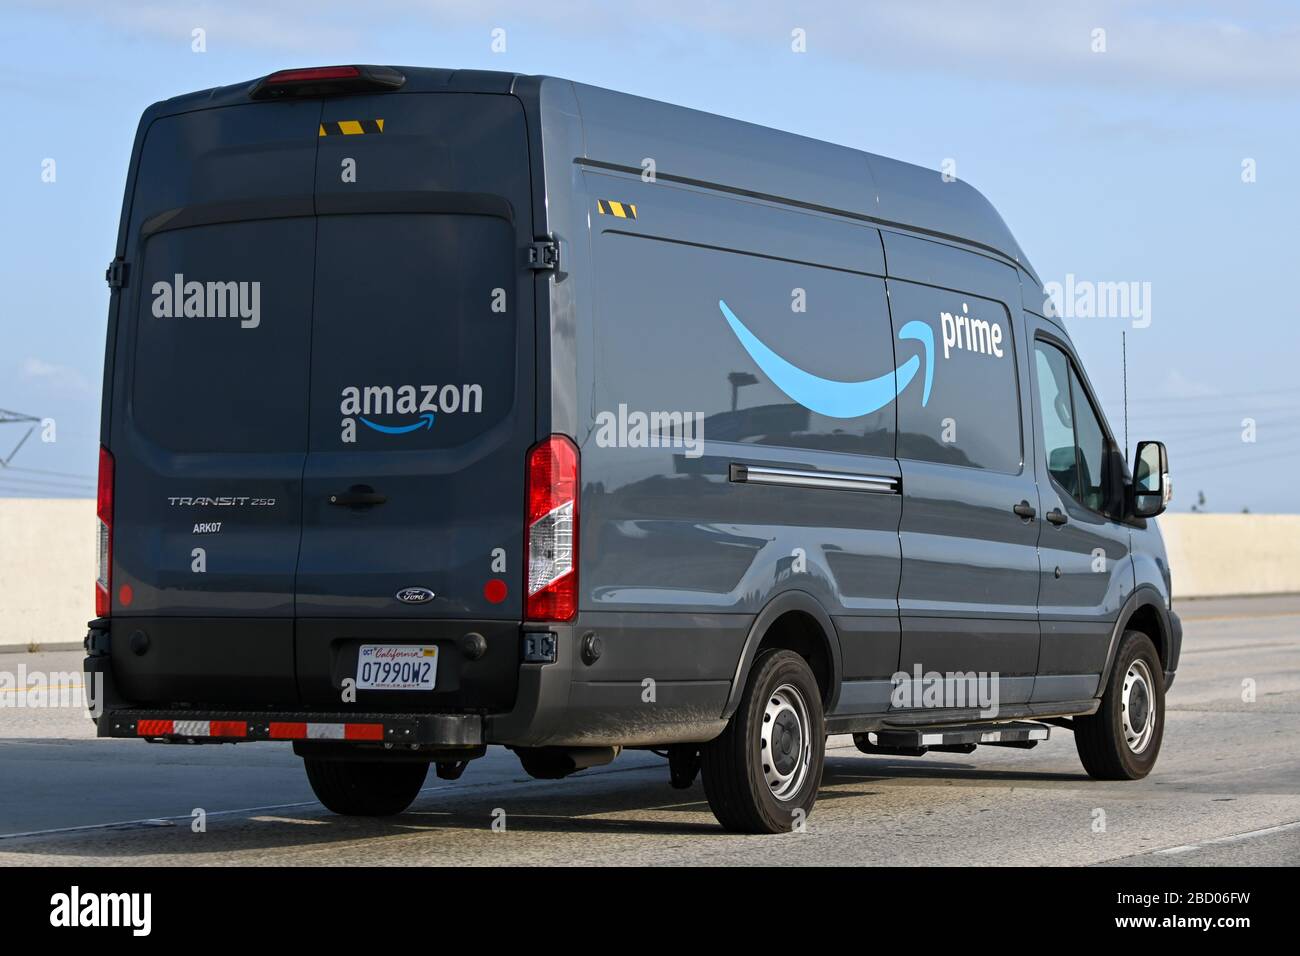 An Amazon Prime, Ford Transit 250, delivery van drives southbound on  Interstate 15, Saturday, April 4, 2020, in Ontario, California, USA. (Photo  by IOS/Espa-Images Stock Photo - Alamy